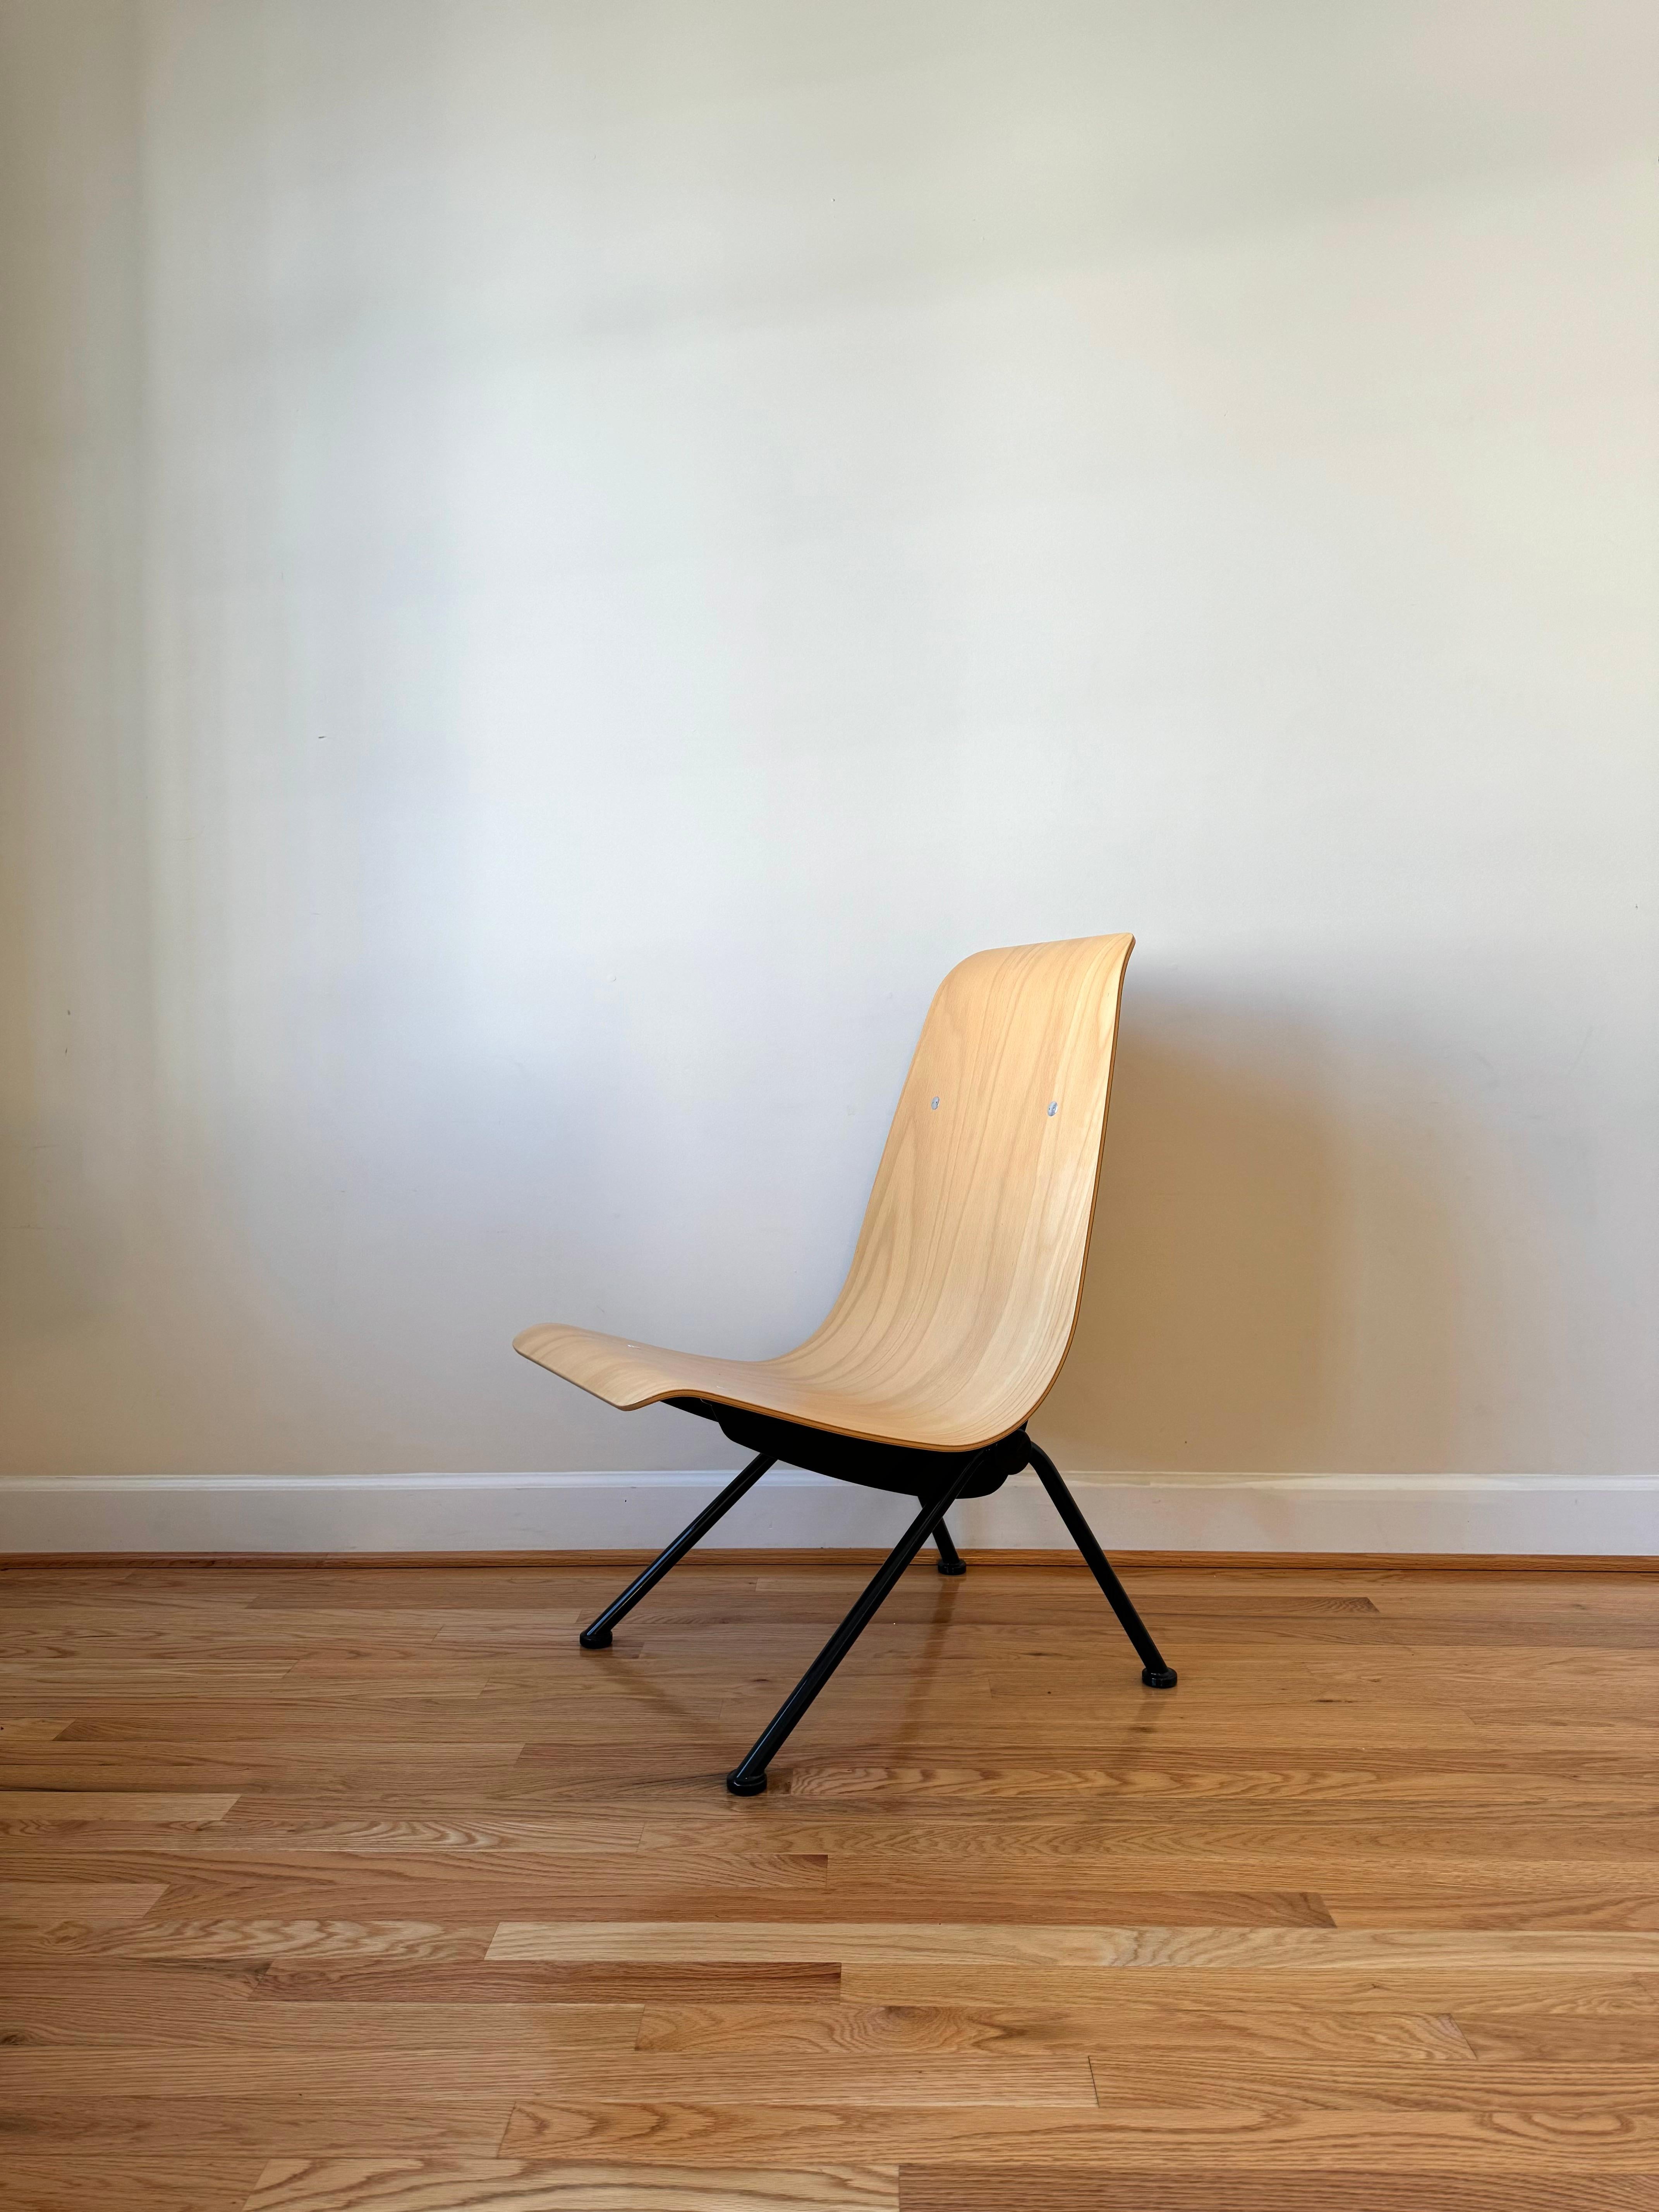 “This new “relaxation chair” was designed as part of major programs for furniture for student accomodations, and in particular for the Cité Universitaire in Antony, near Paris.

Early in 1955 Jean Prouvé designed a “light easy chair” more economical